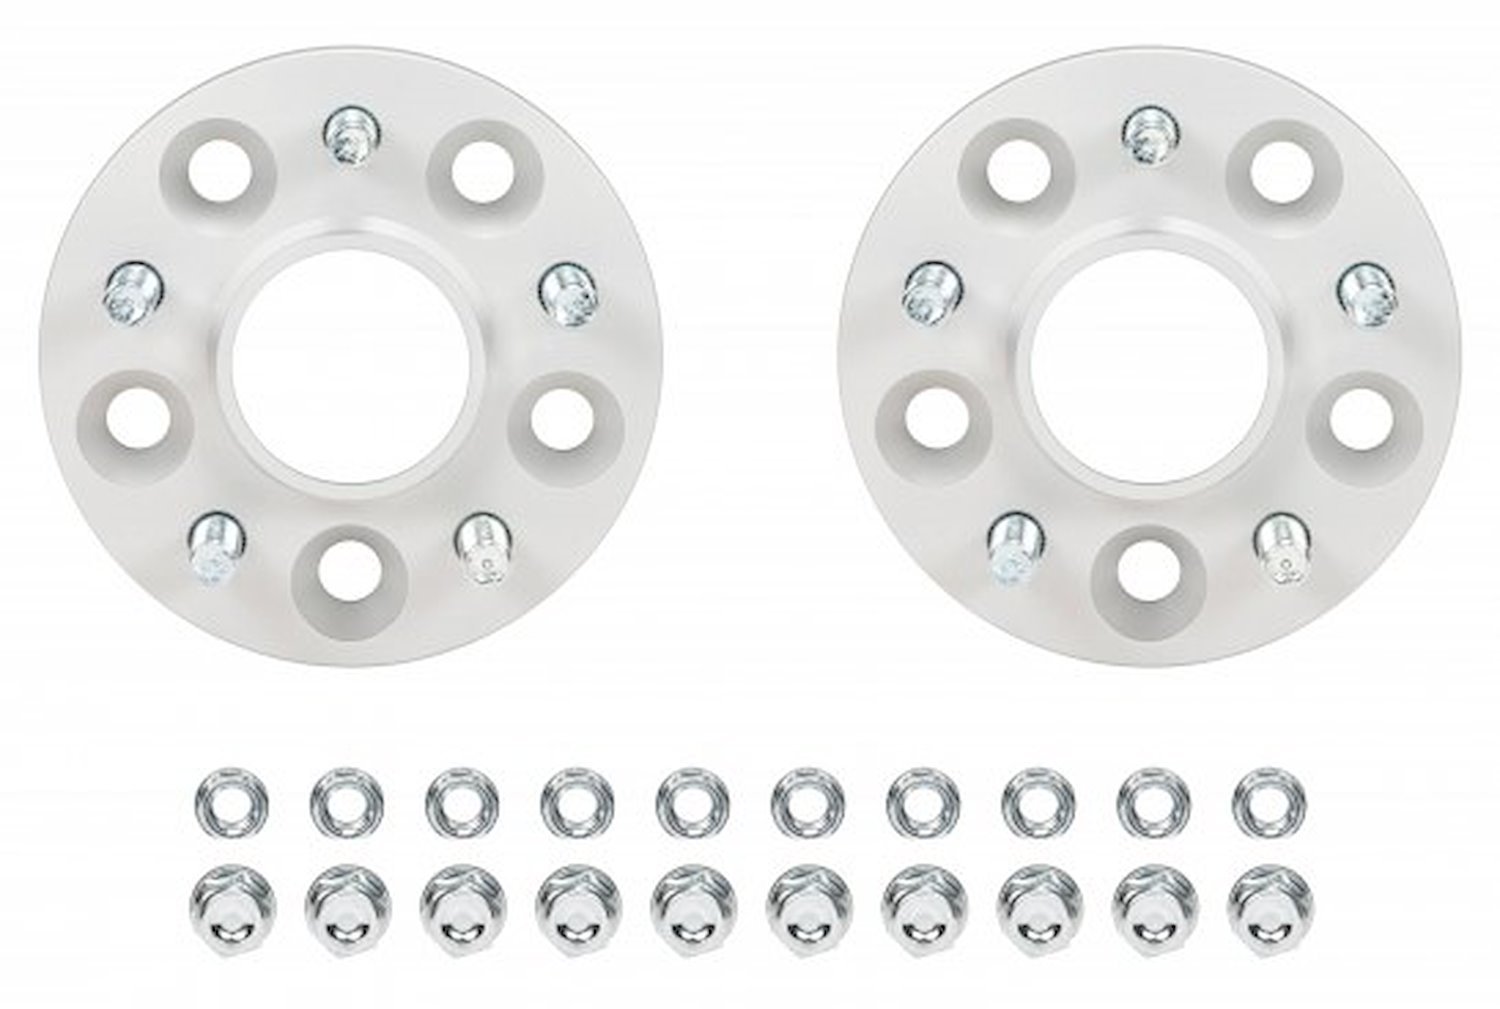 S90-4-15-027 15 mm Pro-Spacer Kit for Select Late Model Chevy Camaro